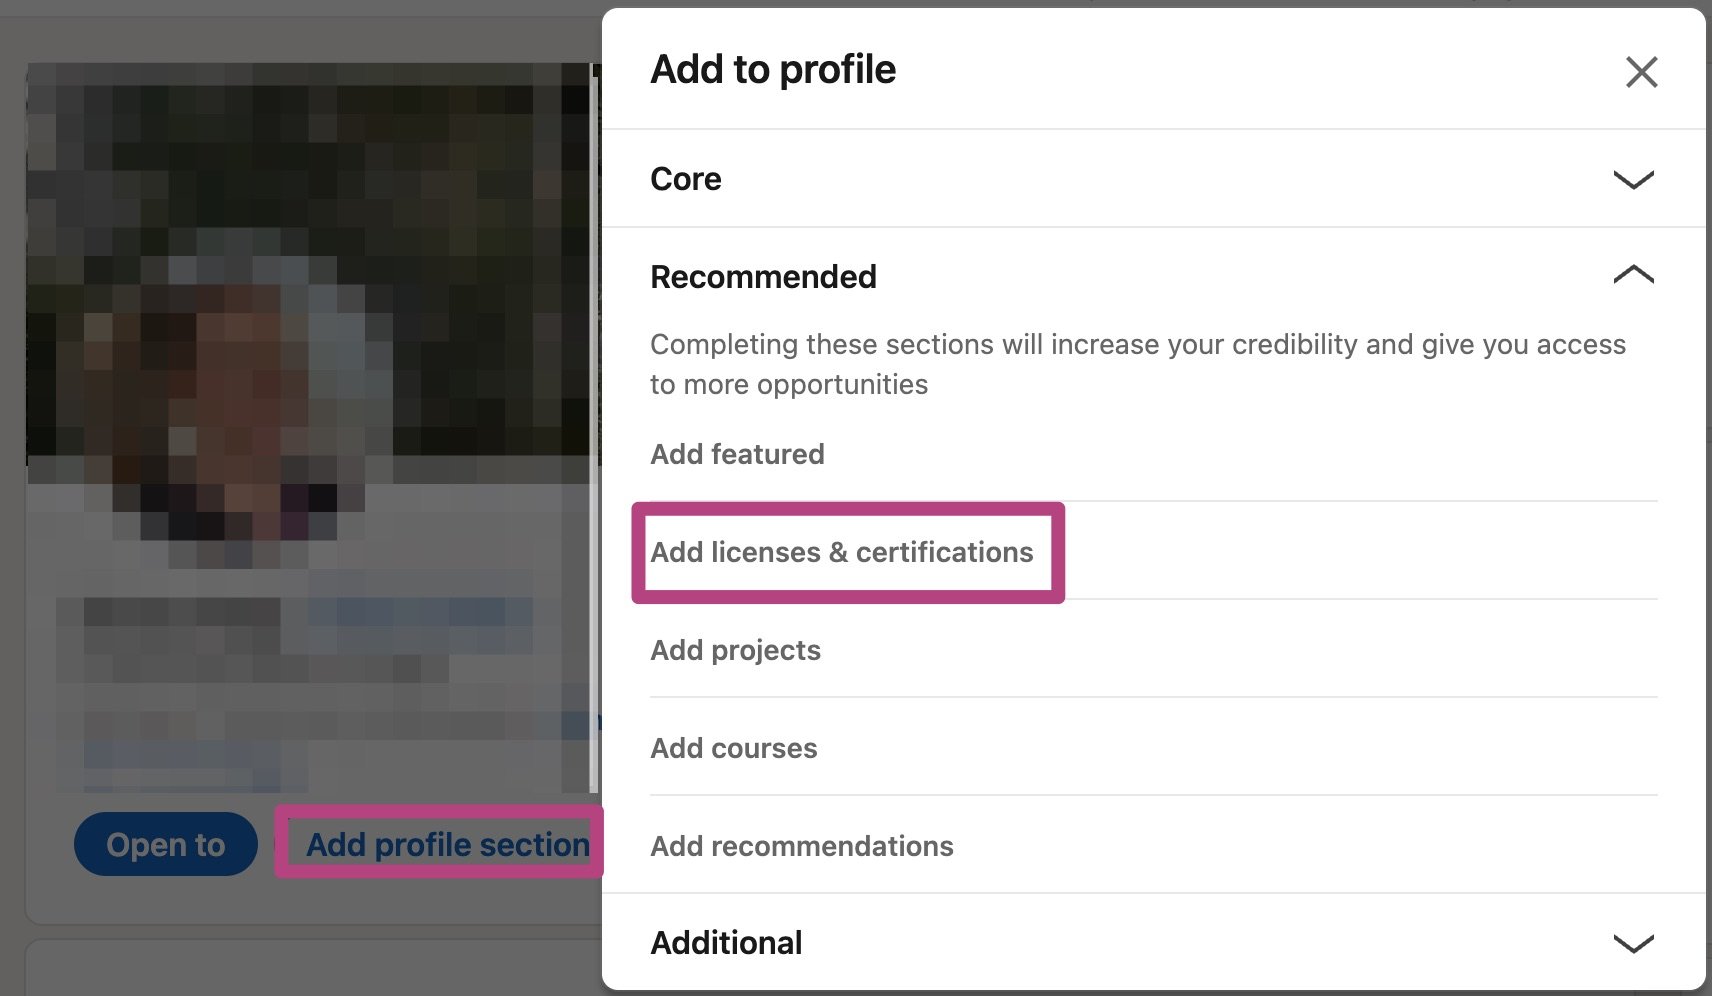 A screenshot of a LinkedIn profile, with purple boxes around add profile section and add licenses & certifications